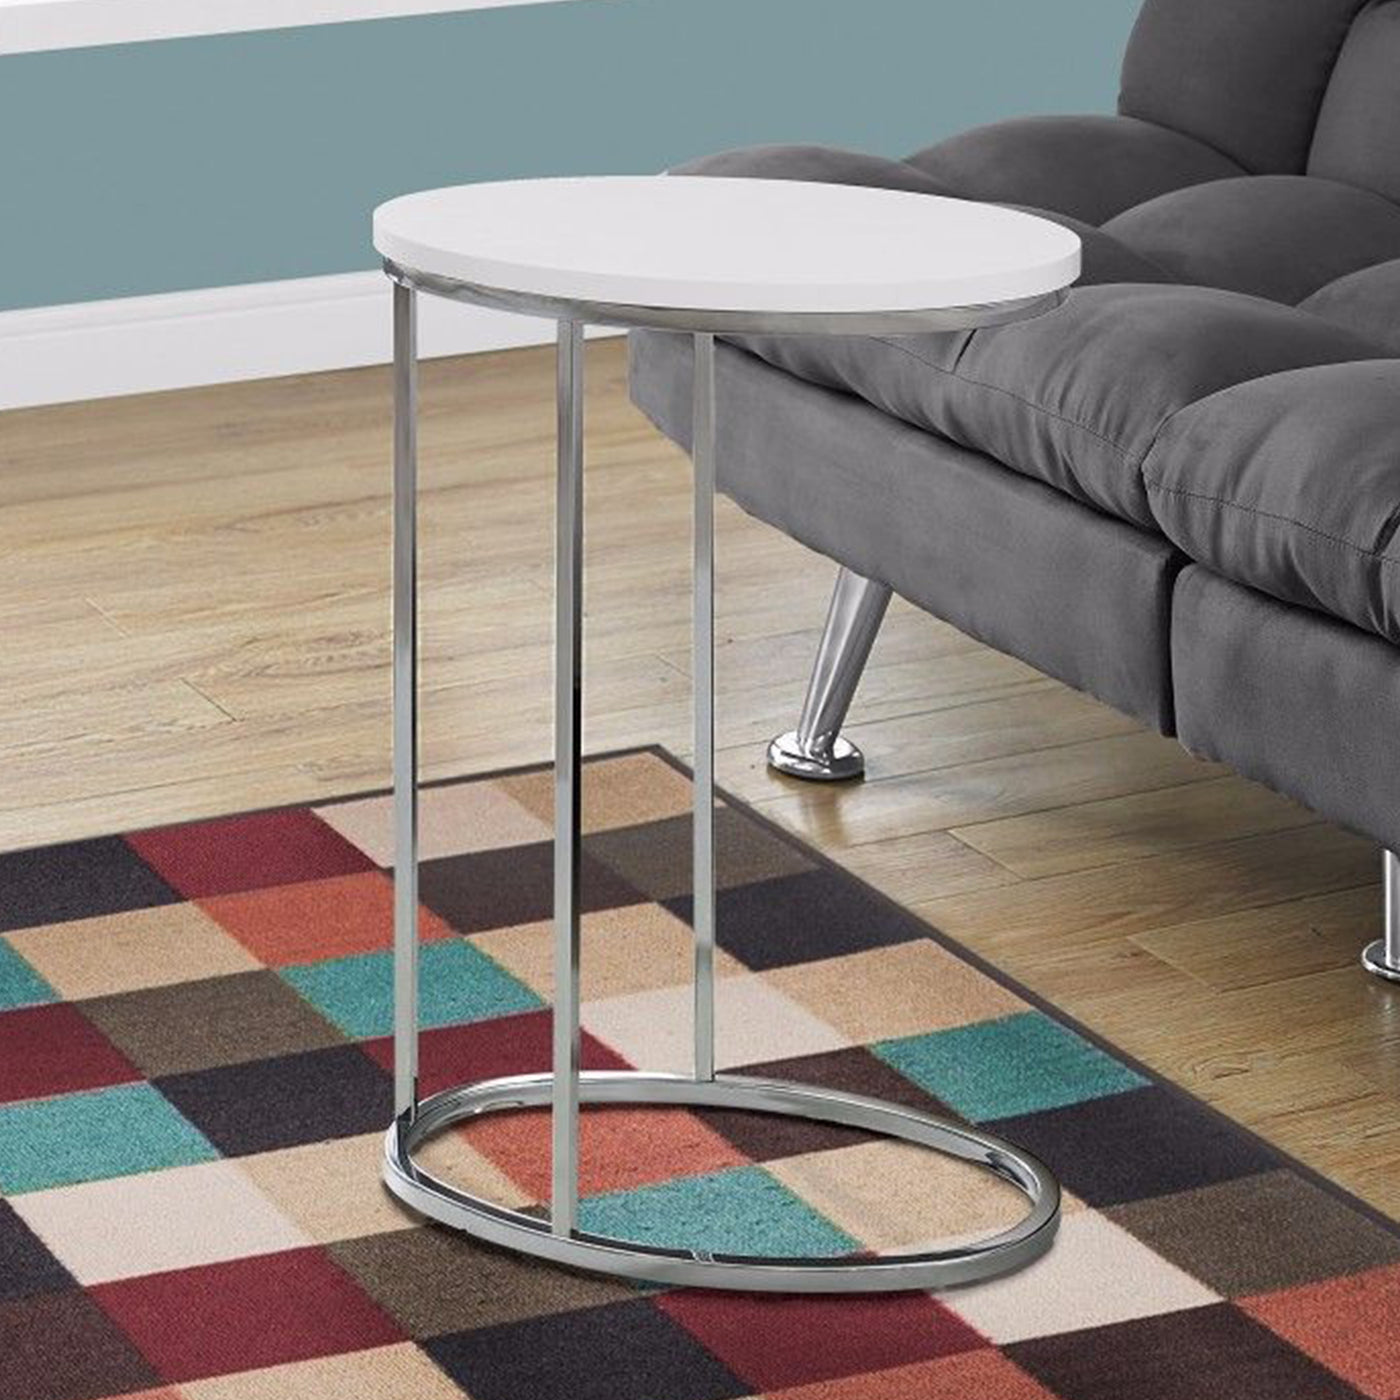 18.5" X 12" X 25" White Particle Board Metal Accent Table